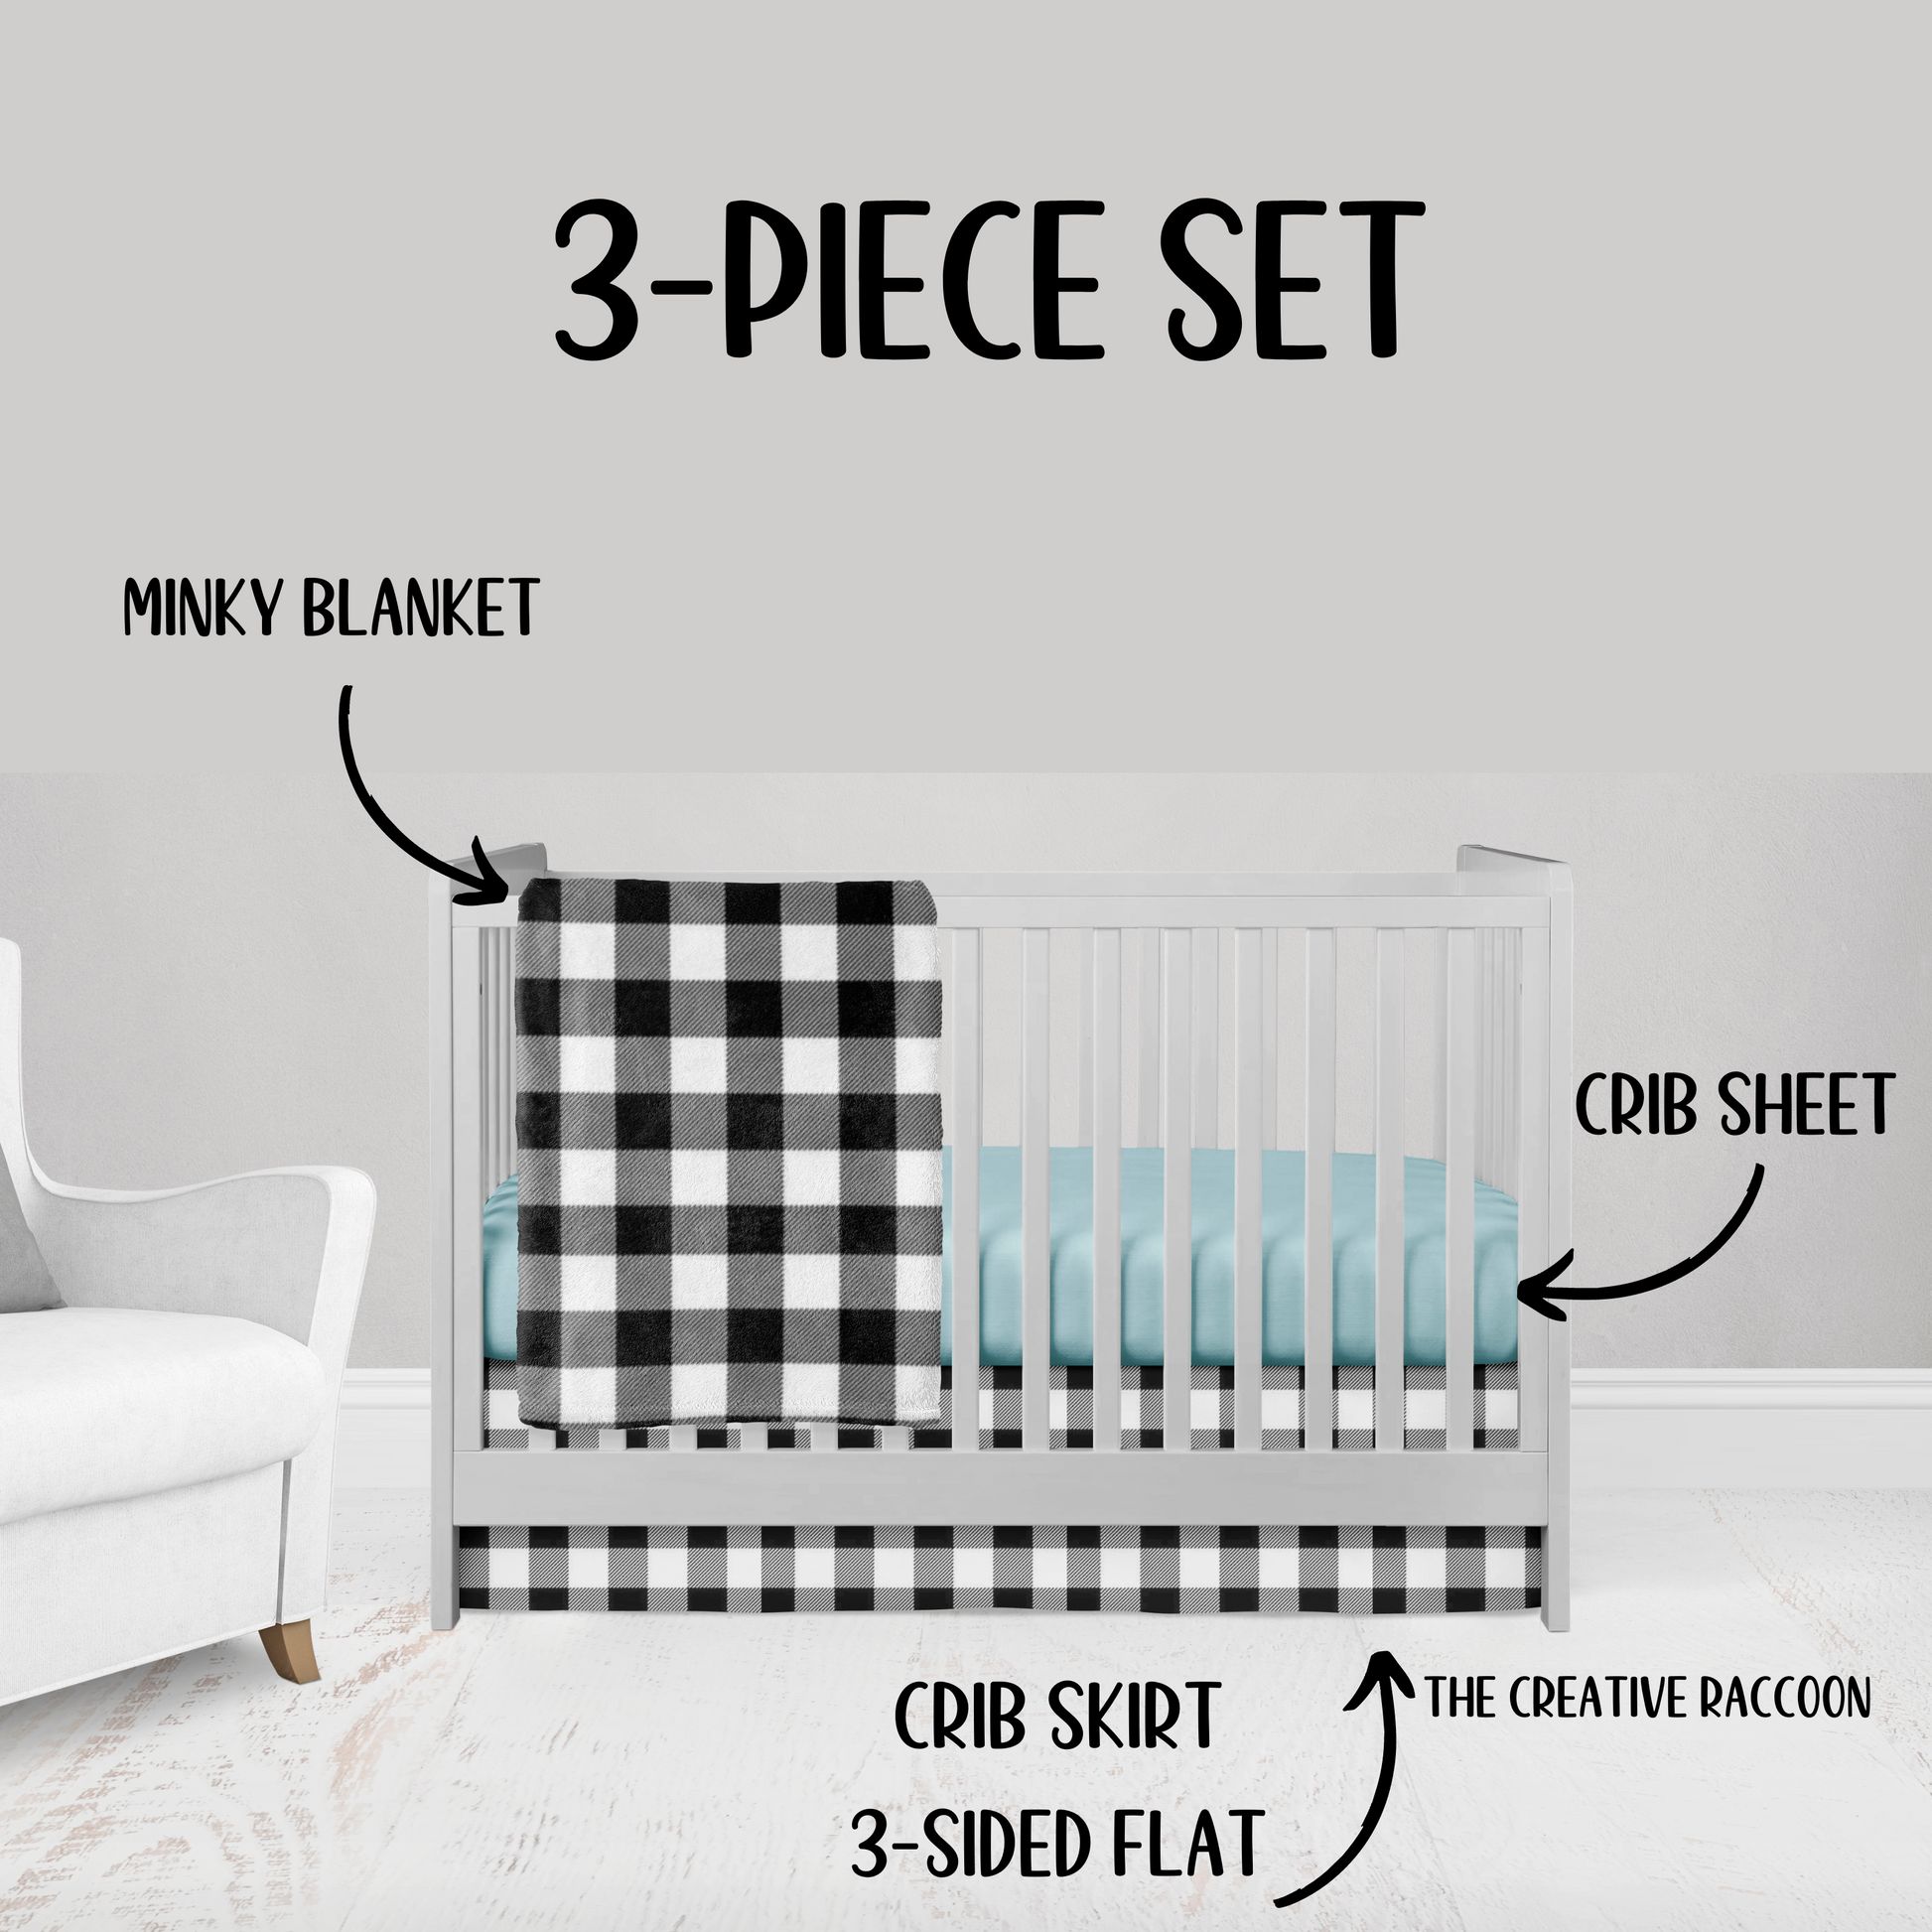 3-piece set - black gingham blanket, crib skirt with aqua sheet .all the gingham check will be the same size squares.